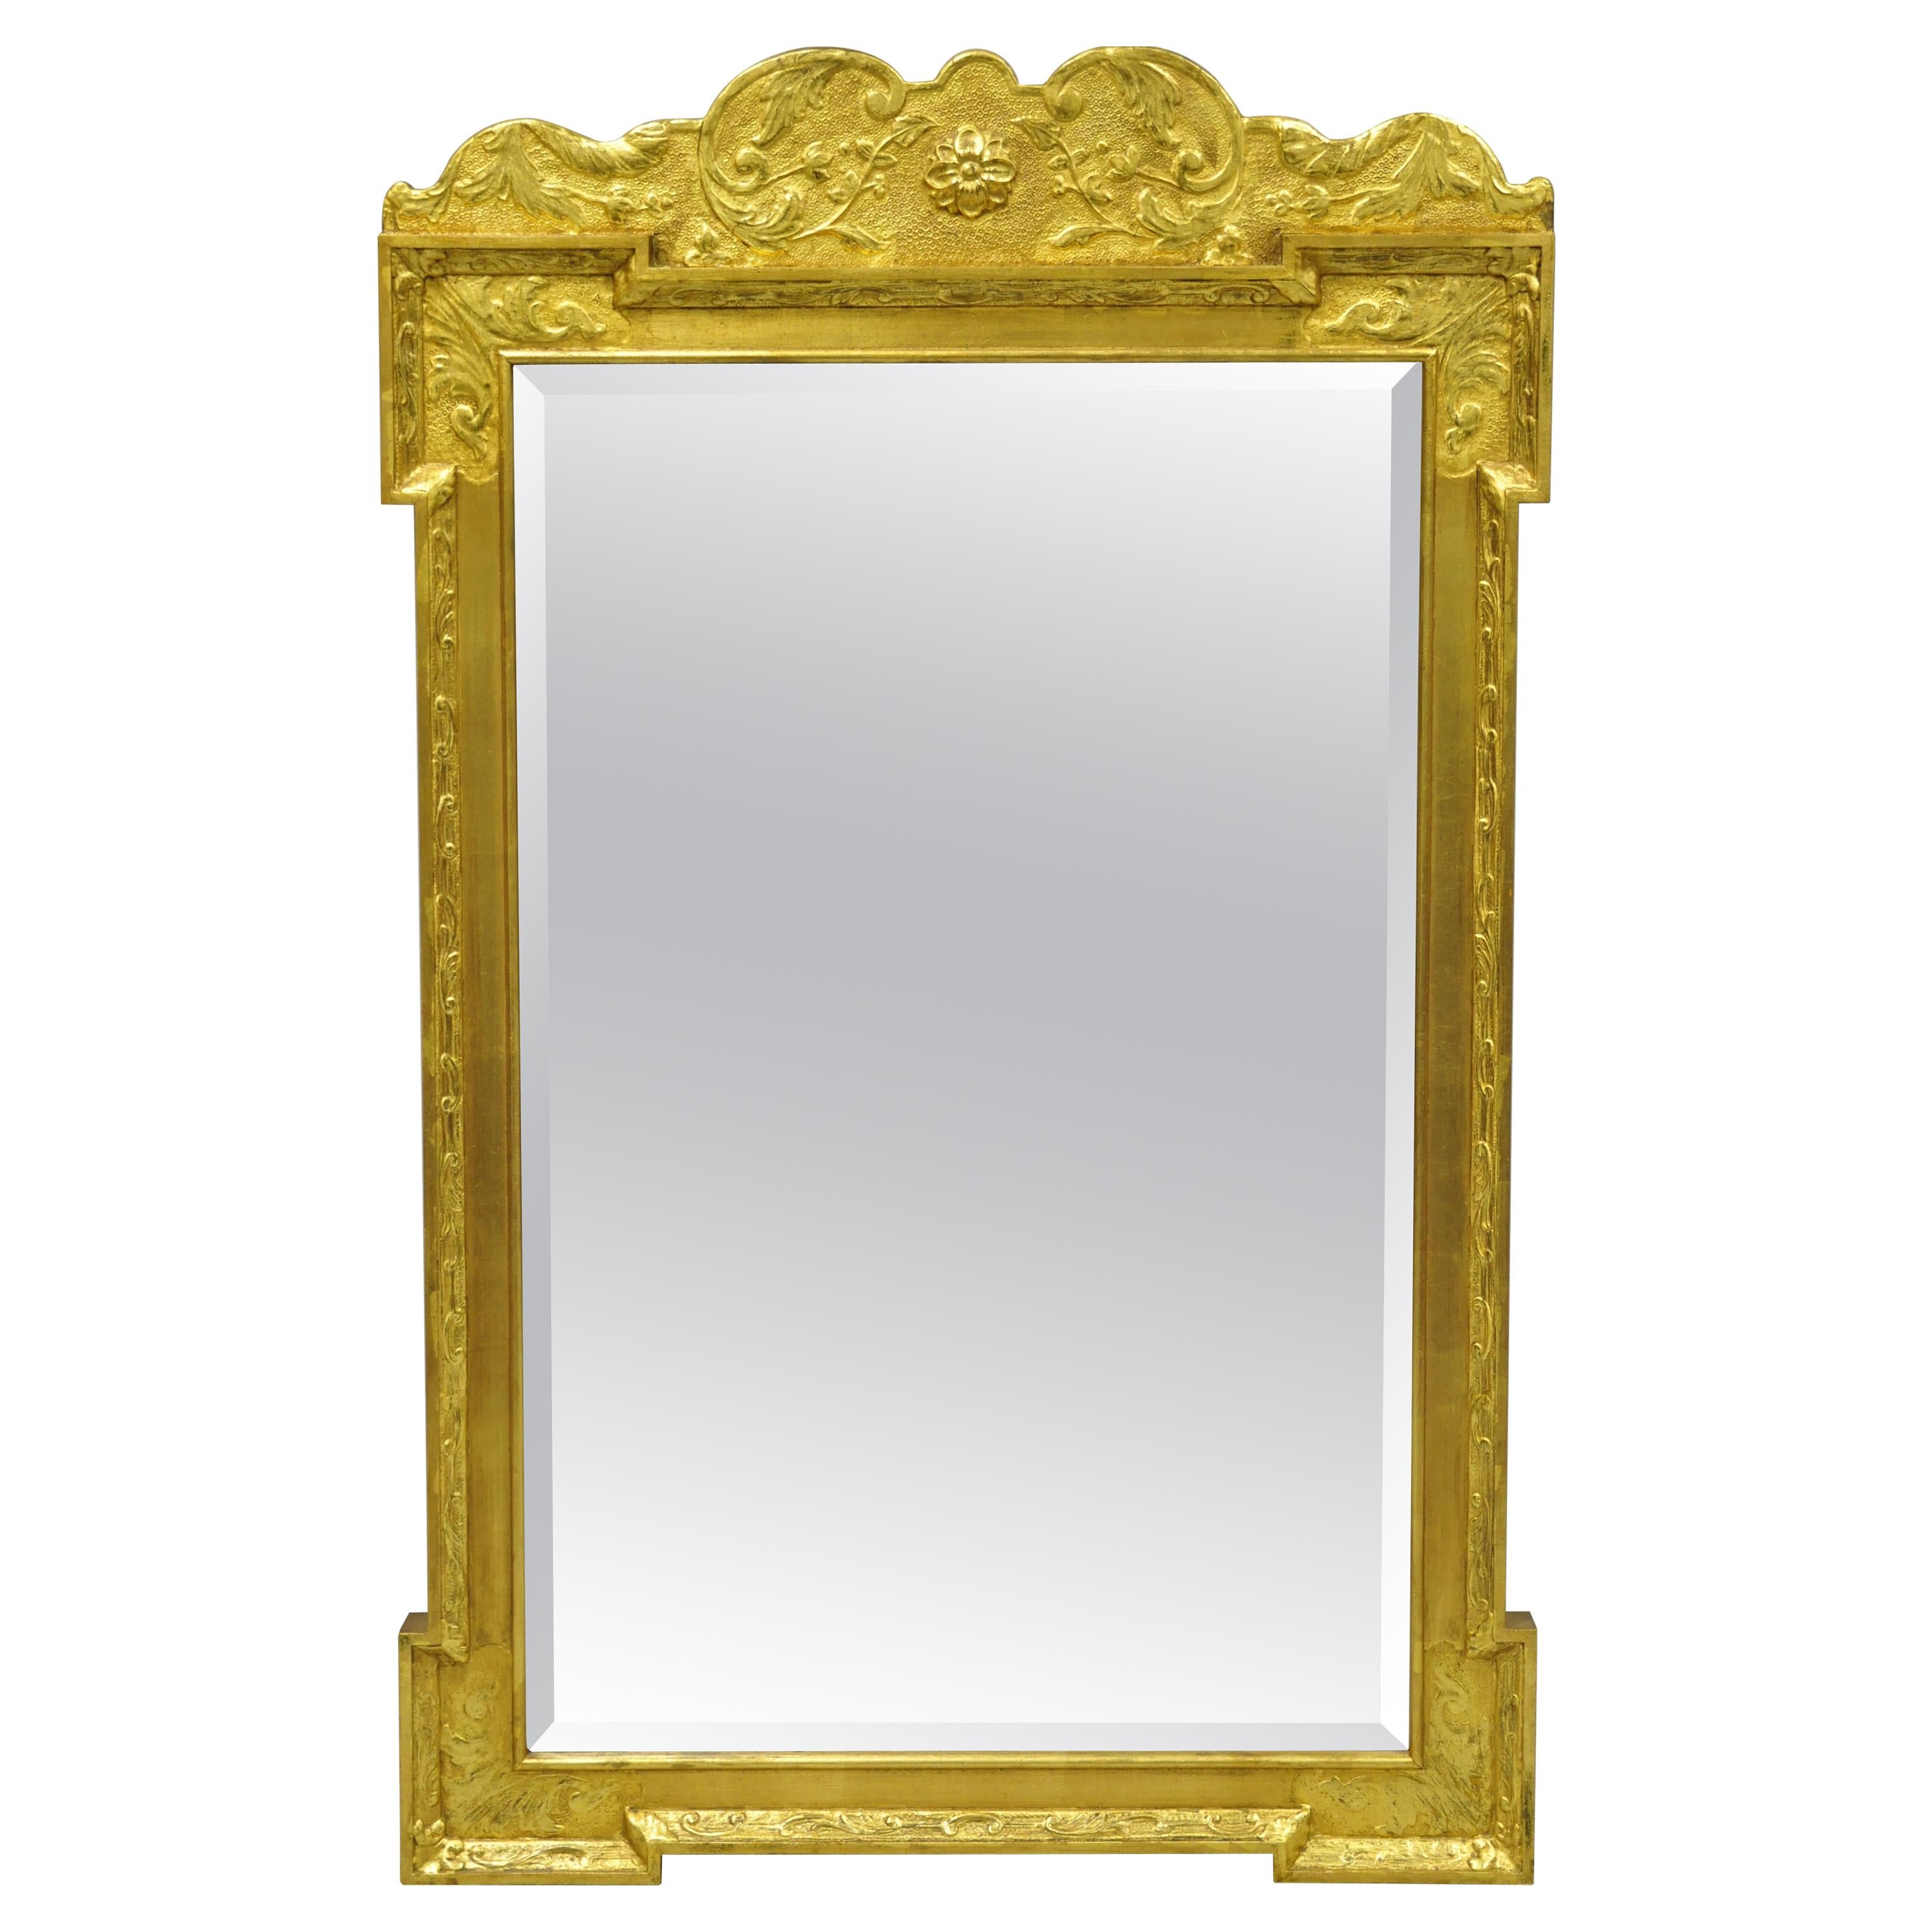 Friedman Brothers Historic Newport Collection Vintage Gold Wall Mirror